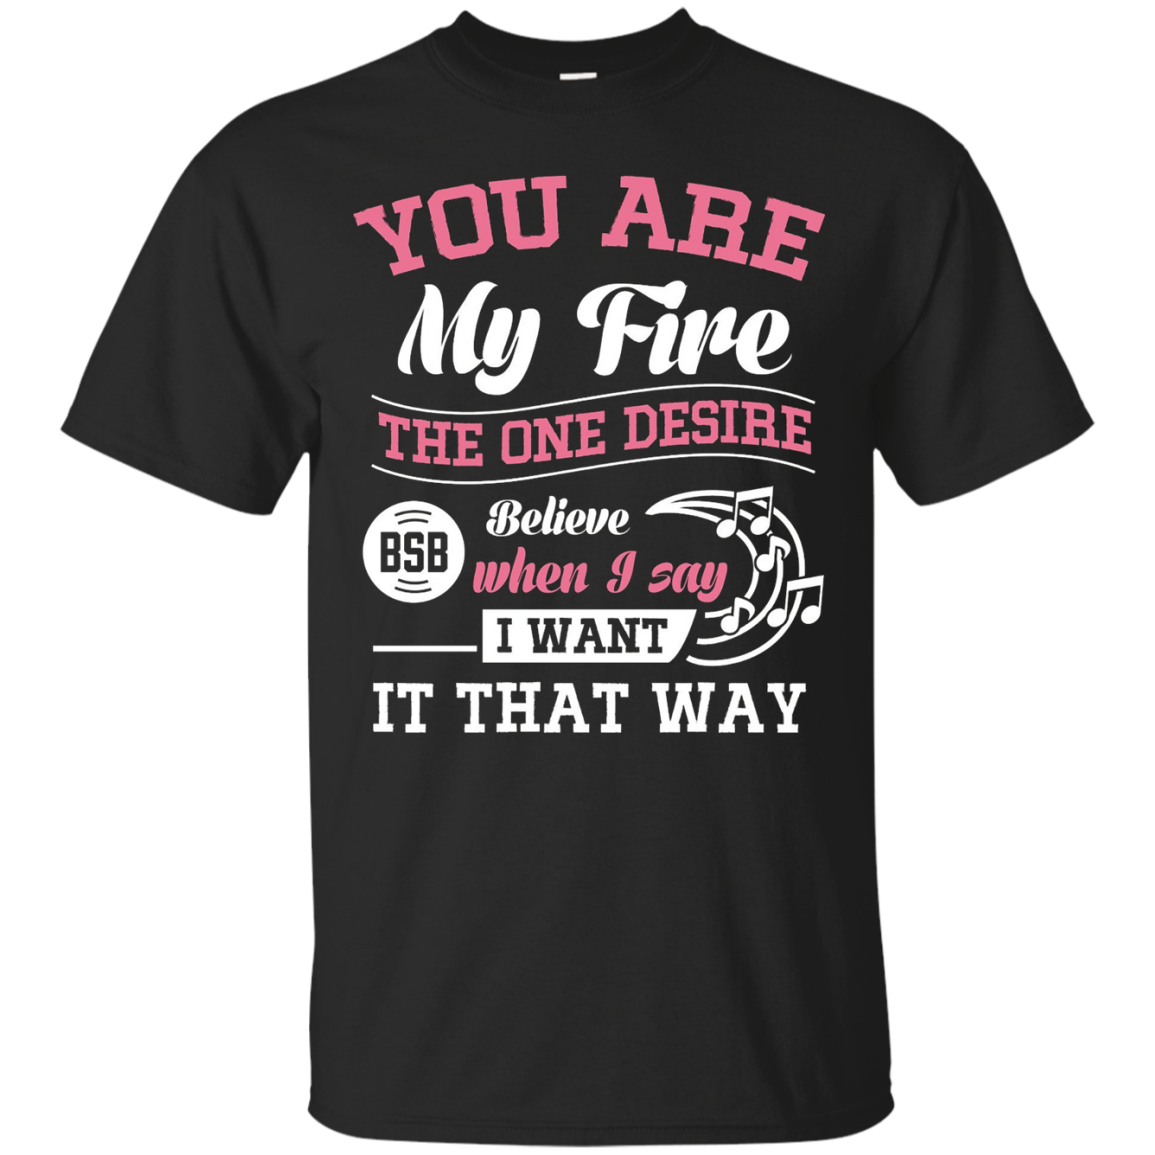 I WANT IT THAT WAY, BSB GREAT MUSIC T SHIRT